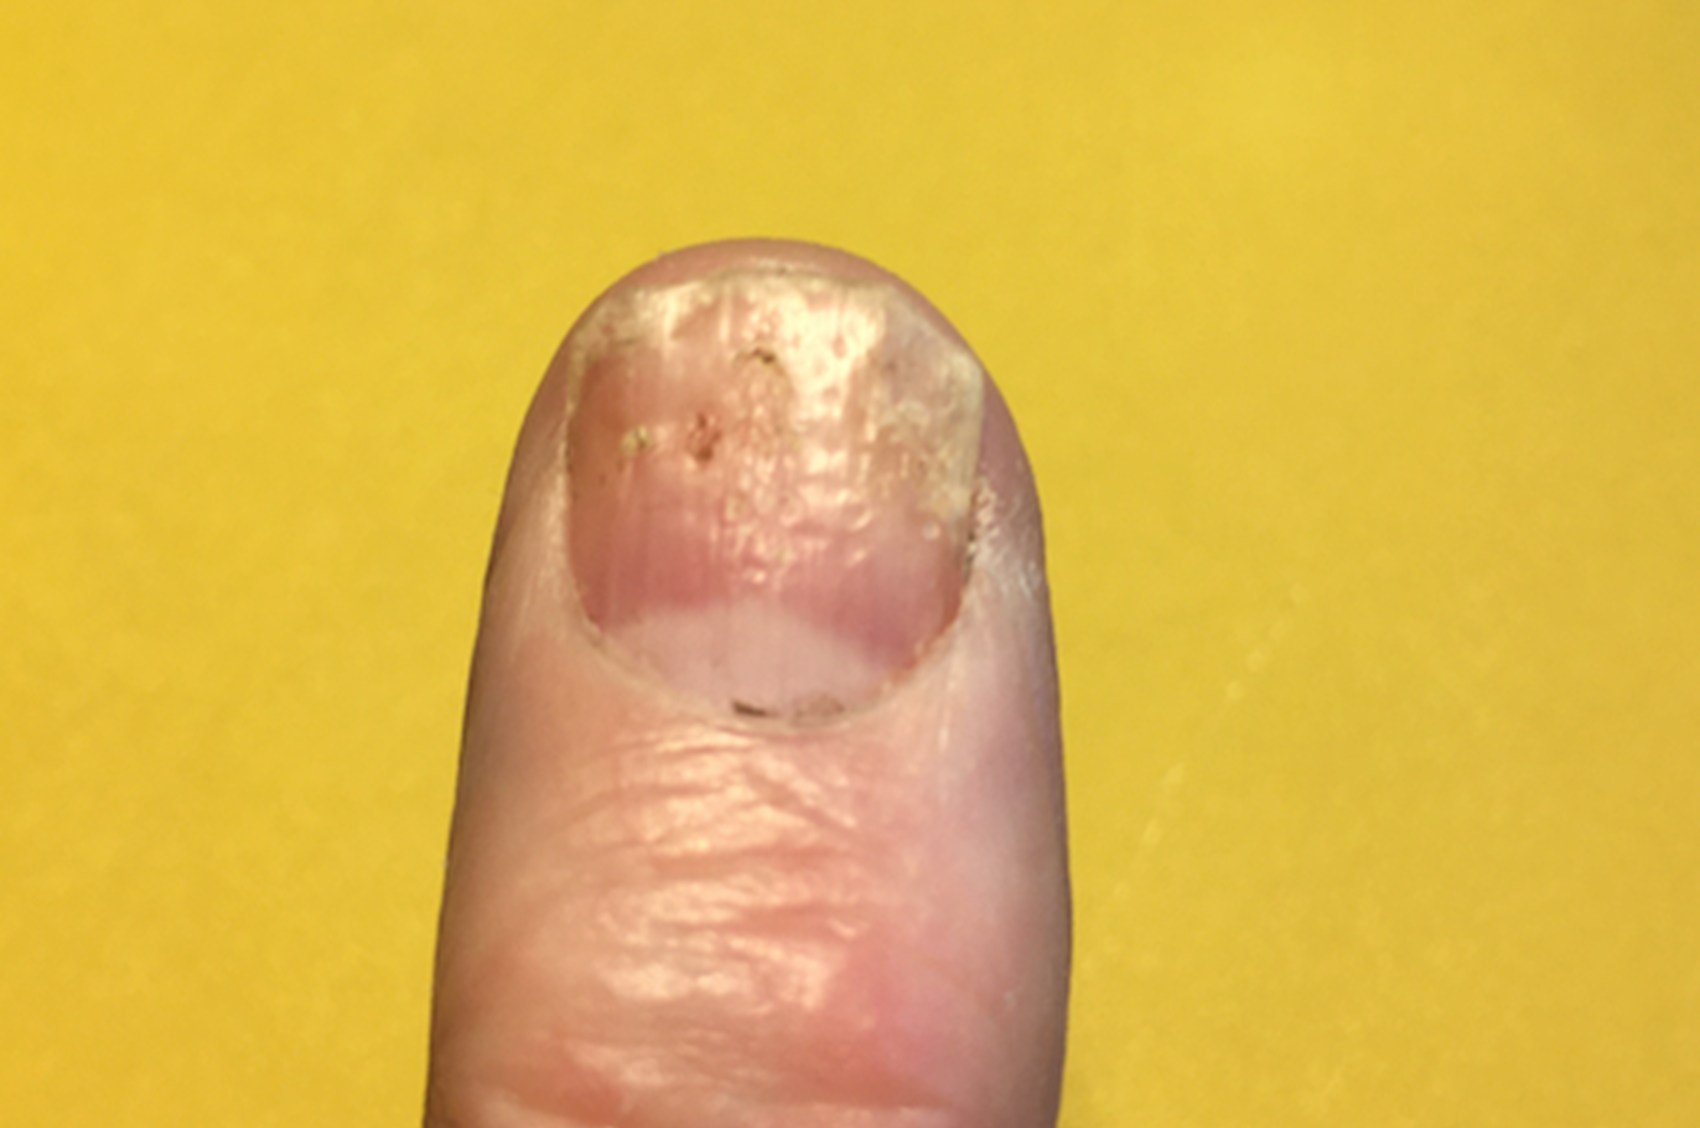 https://www.papaa.org/media/3452/nail-psoriasis.png?anchor=center&mode=crop&width=1700&height=1128&rnd=132429133590000000